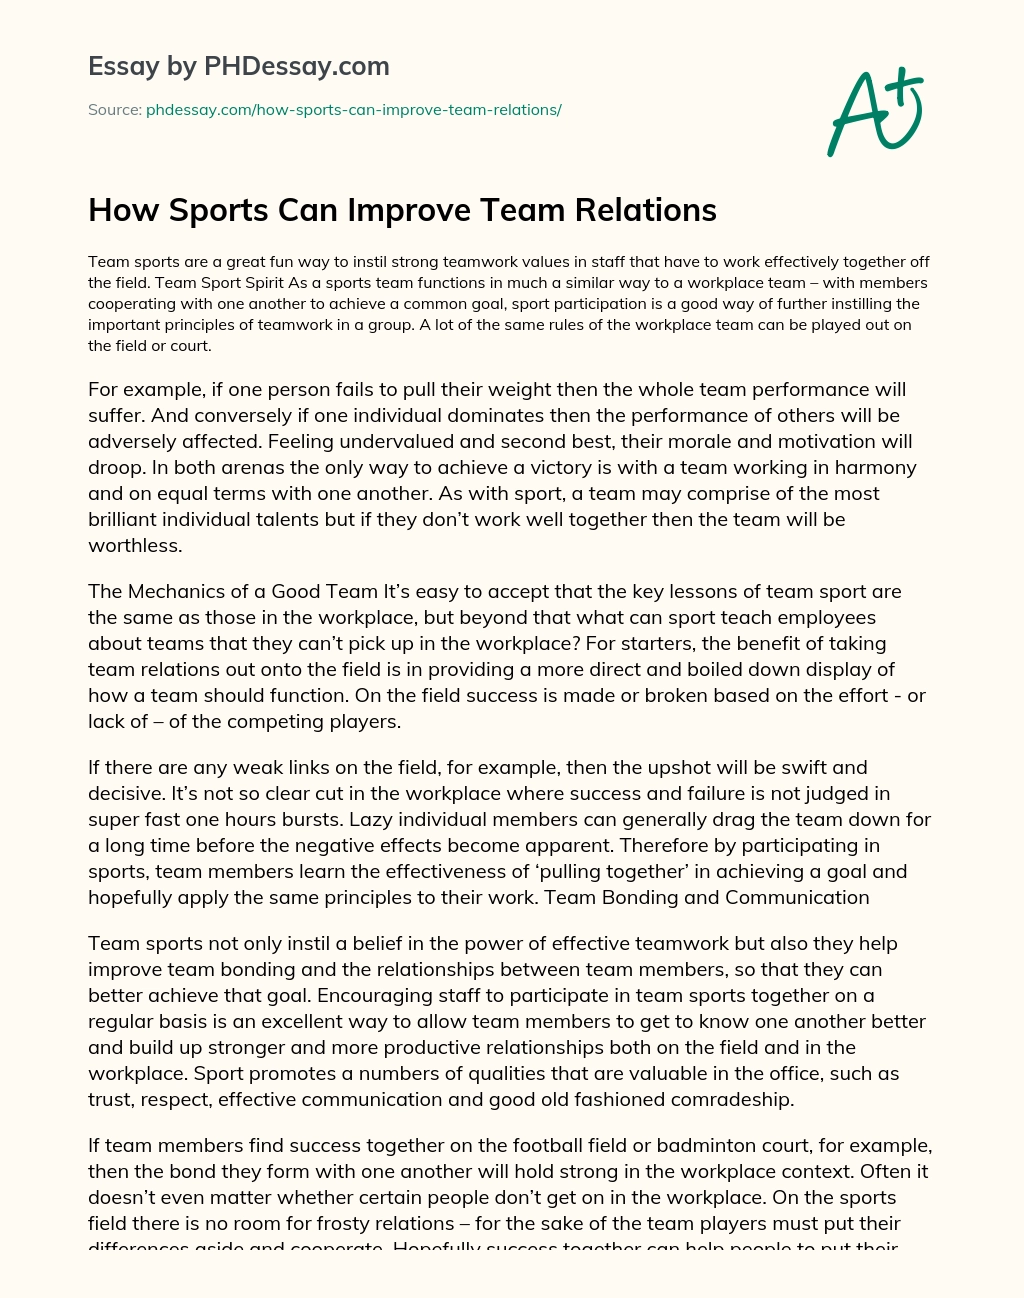 How Sports Can Improve Team Relations essay